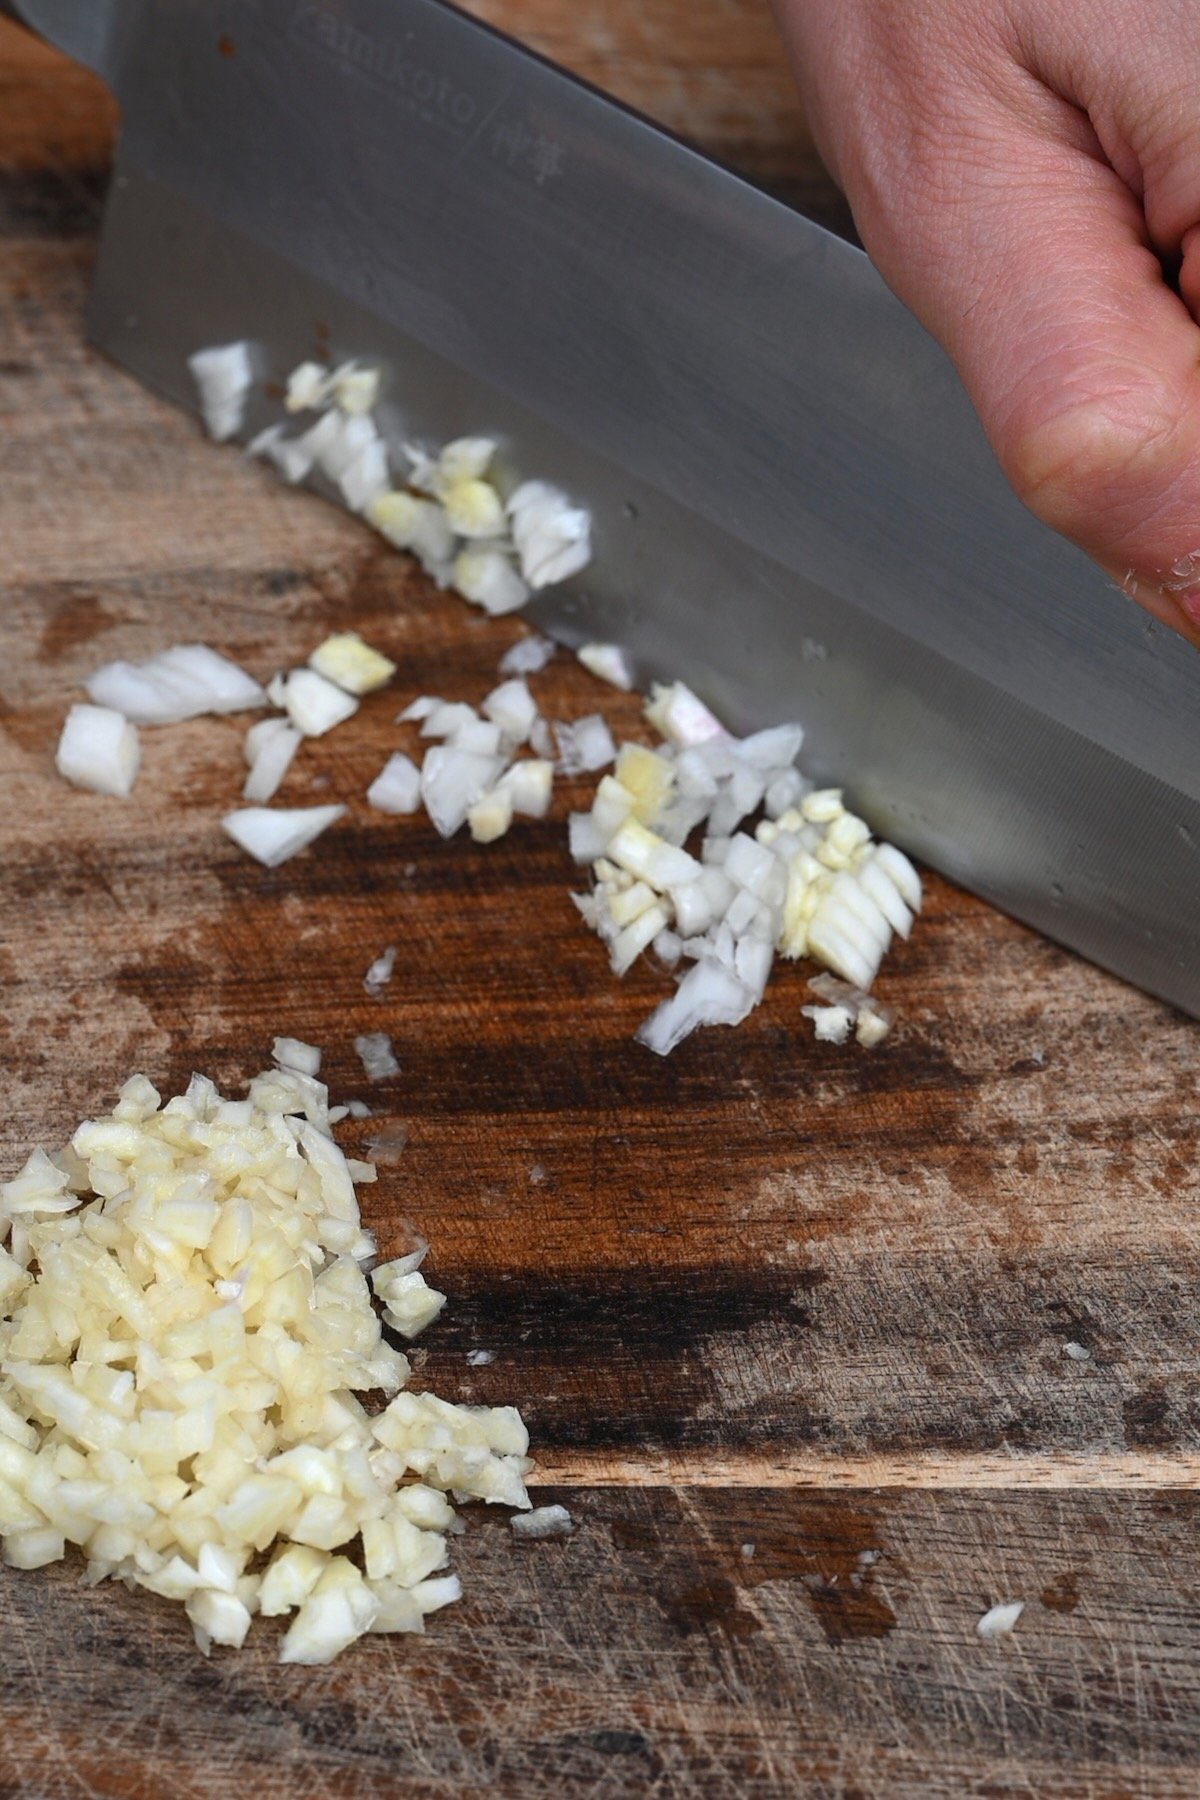 Mincing garlic with a knife